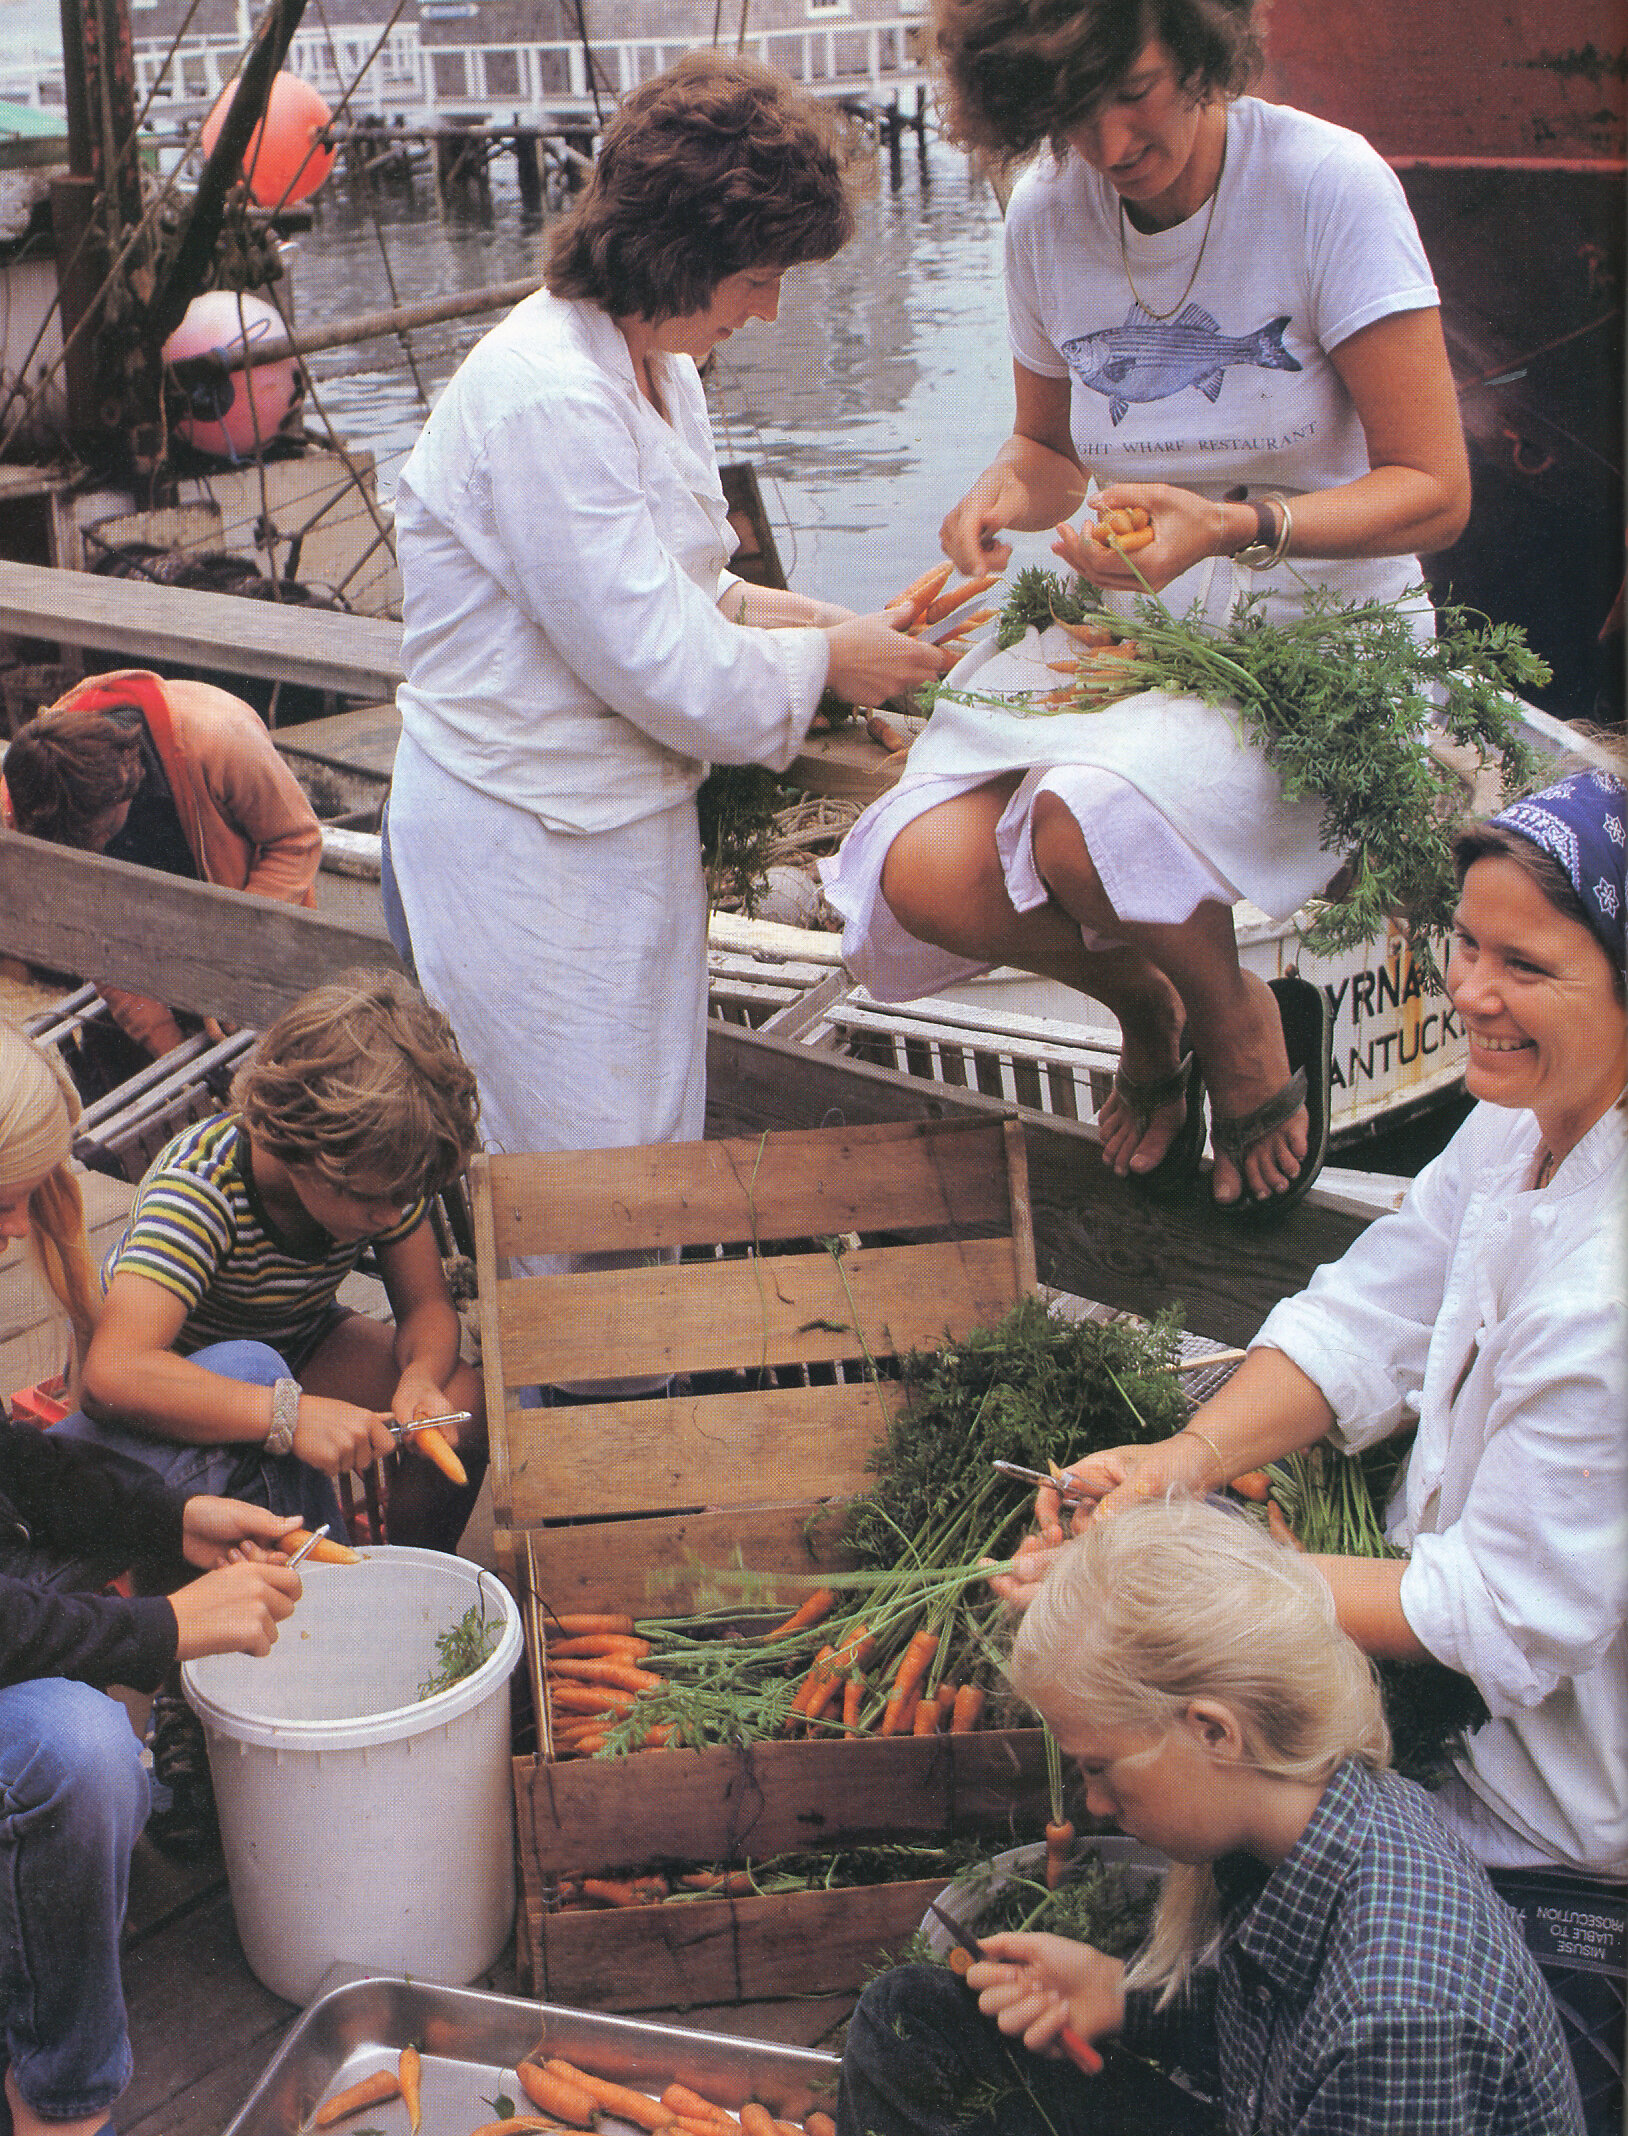 Peeling carrots outside the Straight Wharf restaurant. From 'The Victory Garden Cookbook', 1982.